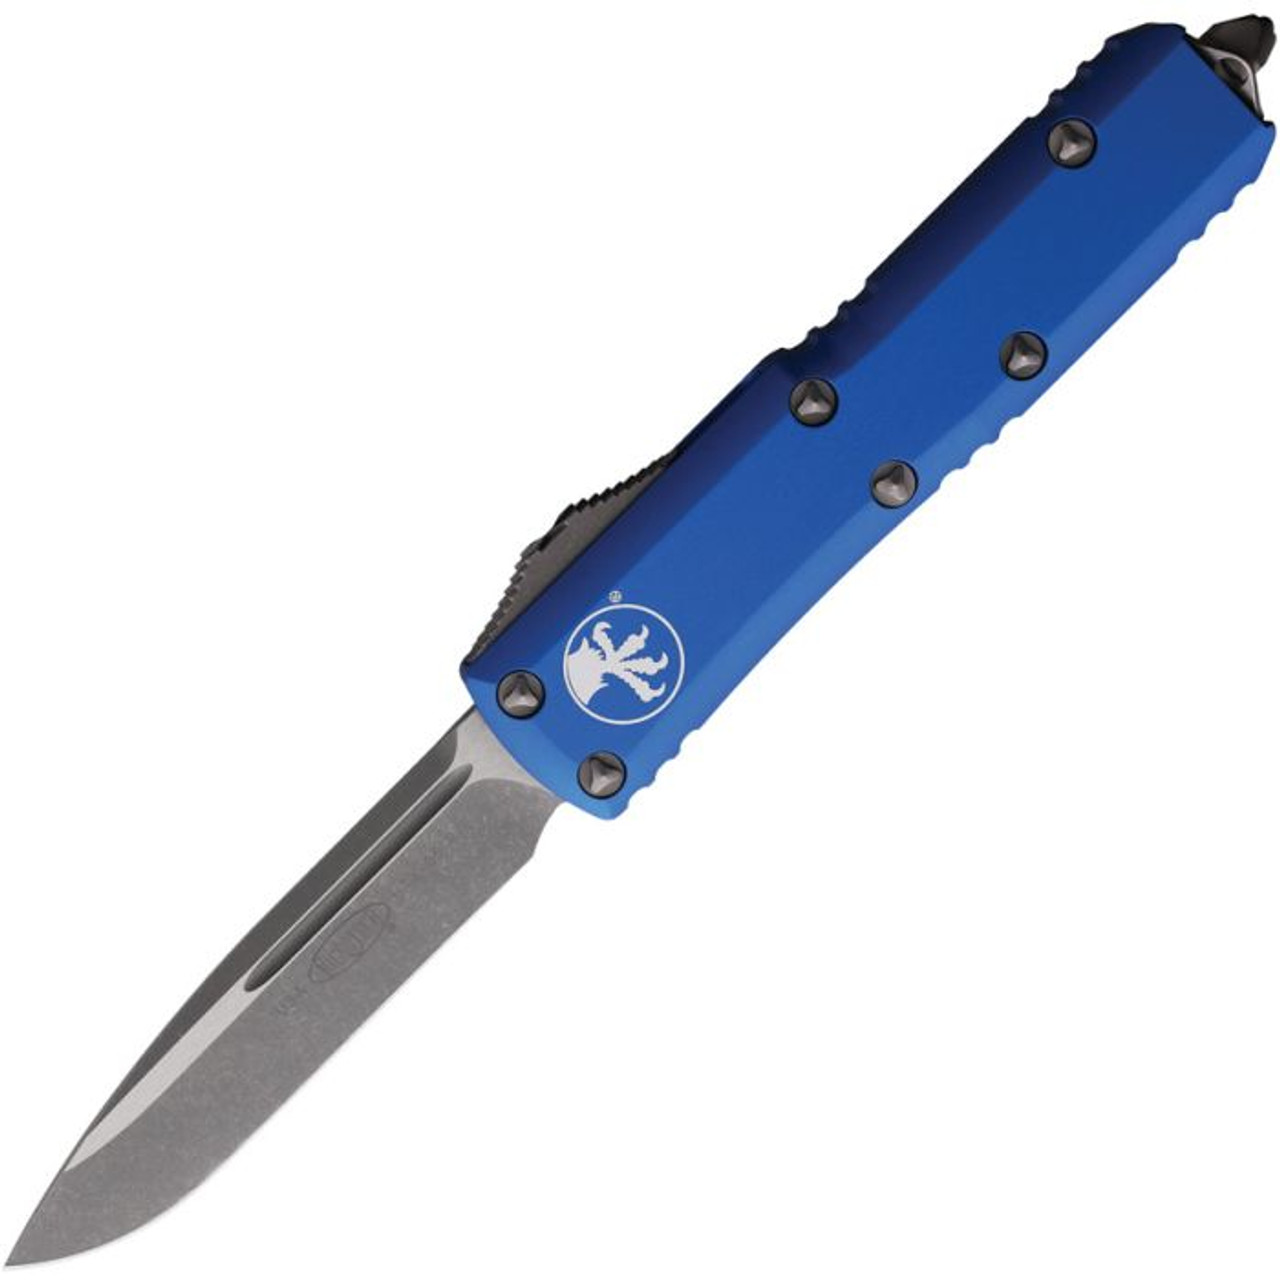 Microtech UTX-85 S/E Ap Blue (MCT23110APBL) 3.13" Premium Steel Stonewashed /Bead Blasted Drop Point Plain Blade, Blue Anodized Aluminum Handle with Glass Breaker